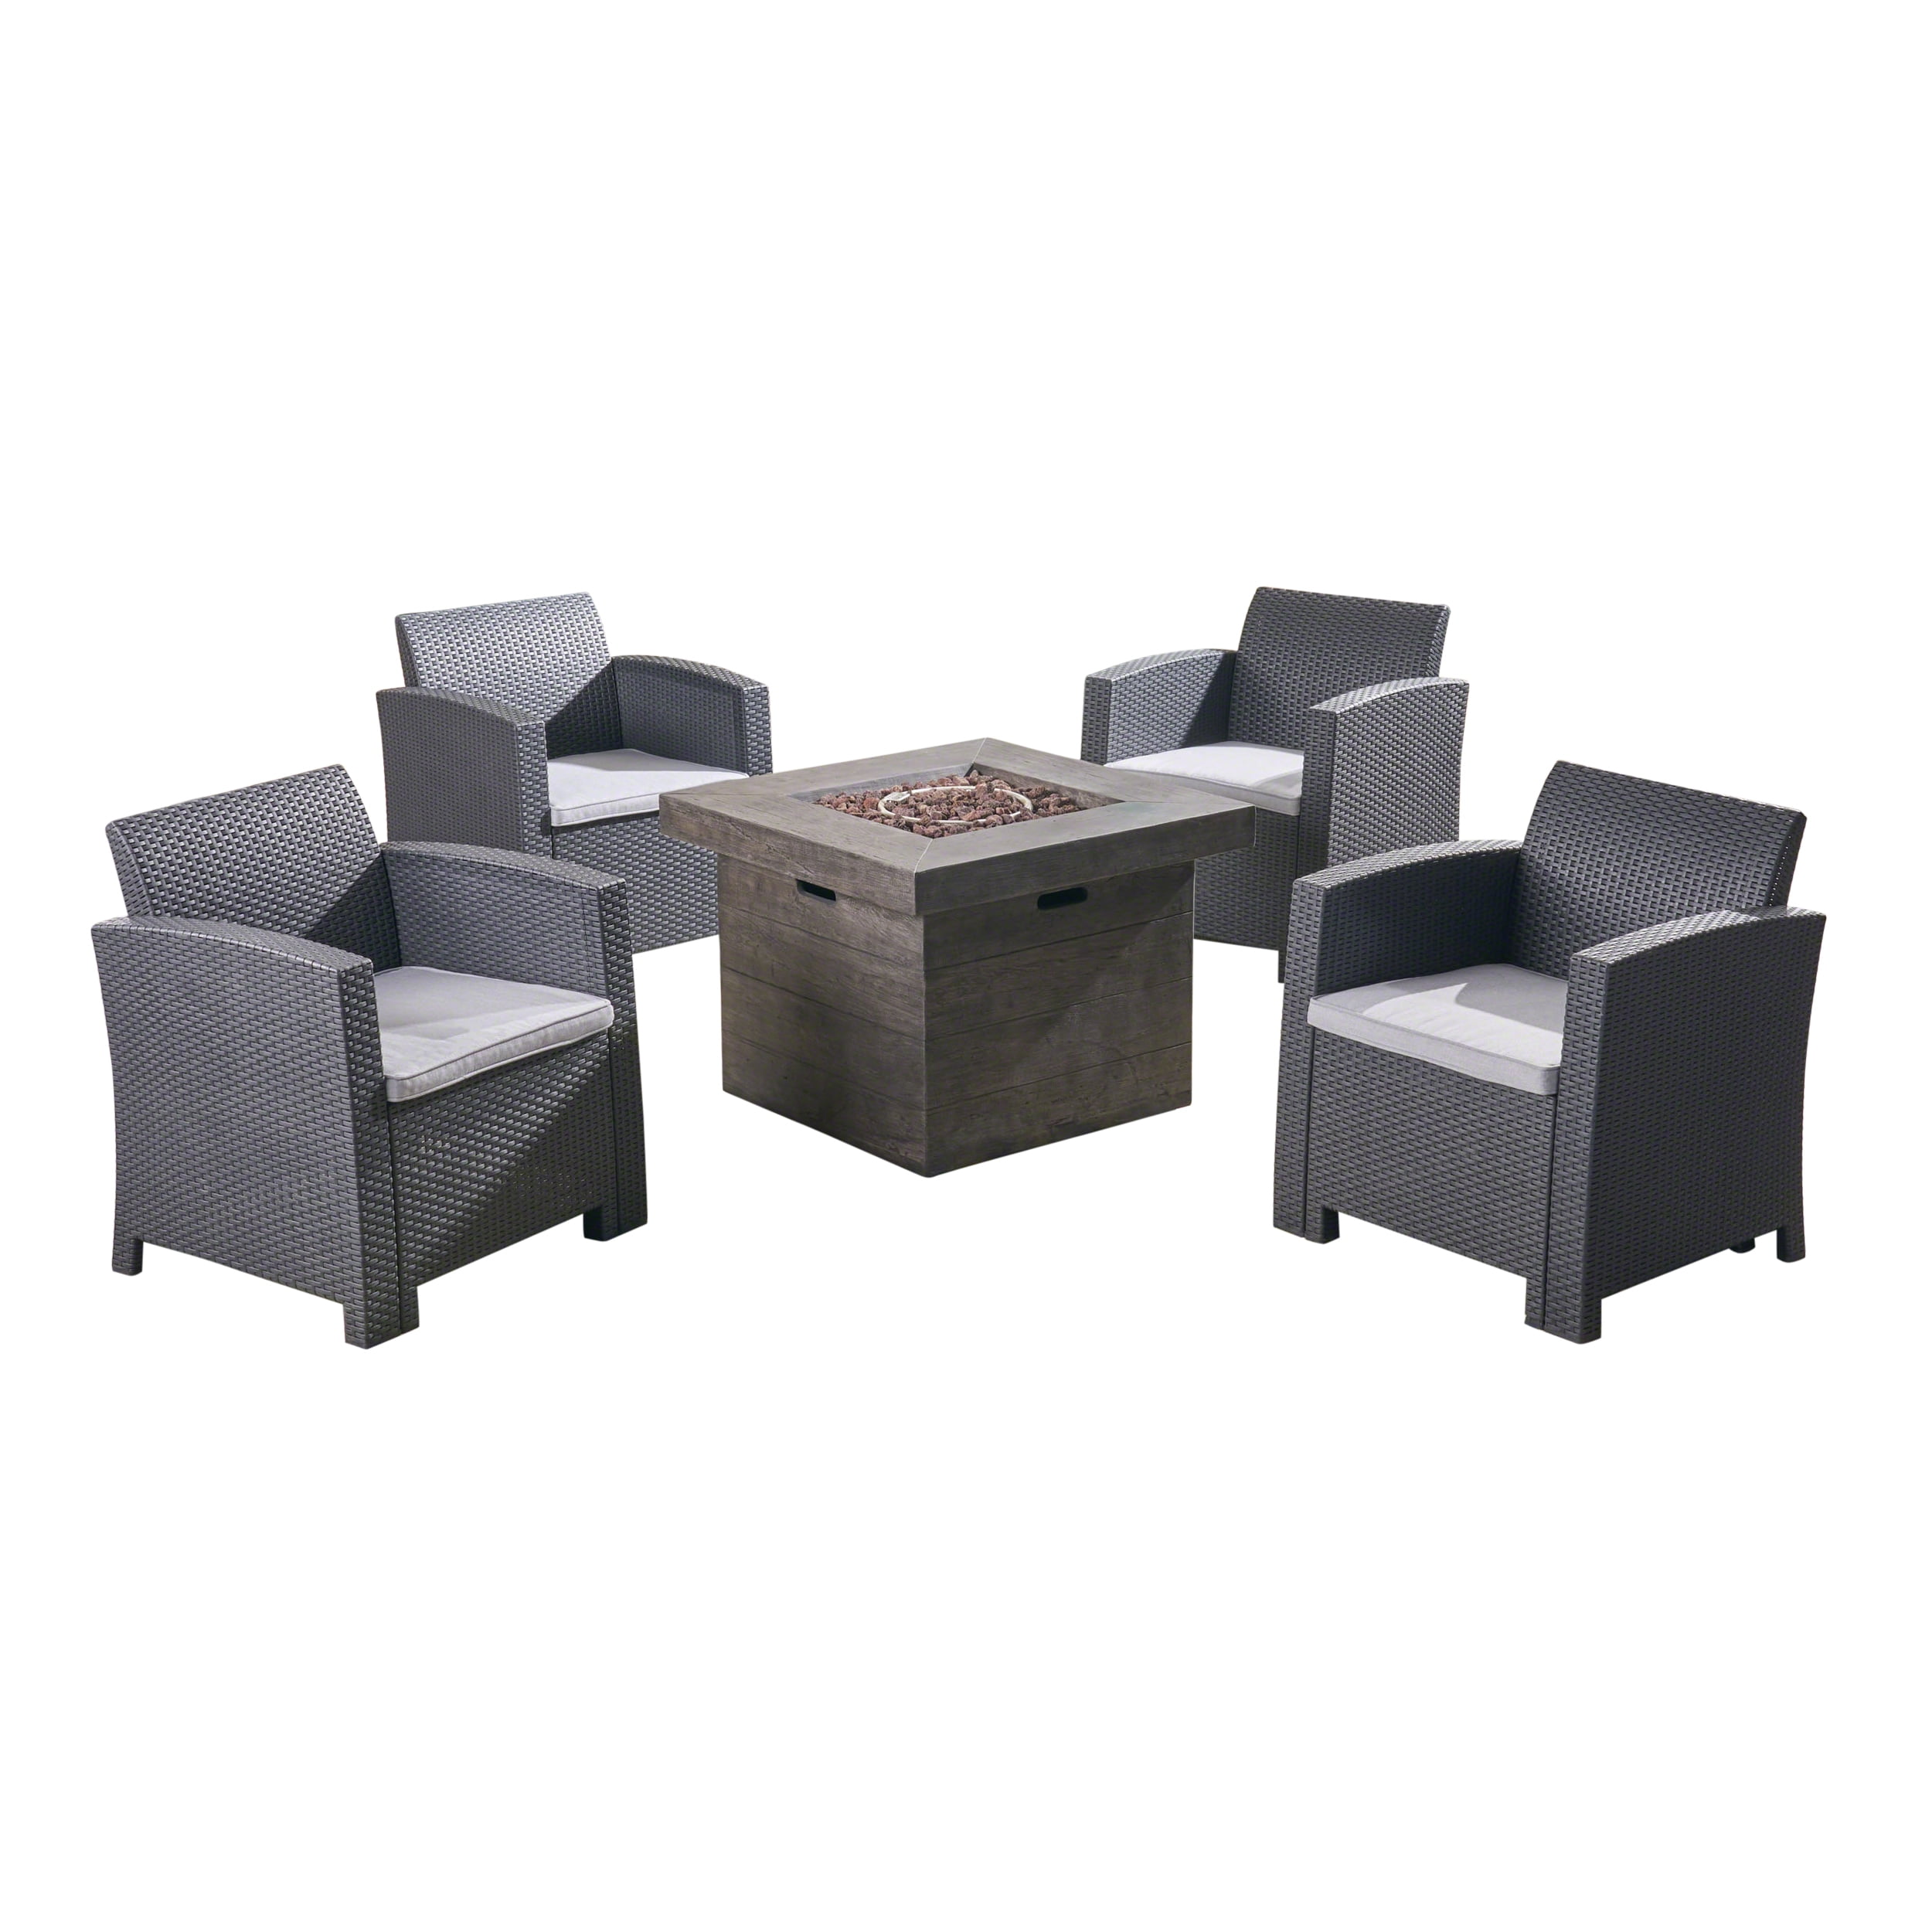 Ollie Outdoor 4 Seater Wicker Print Club Chair Chat Set With Fire